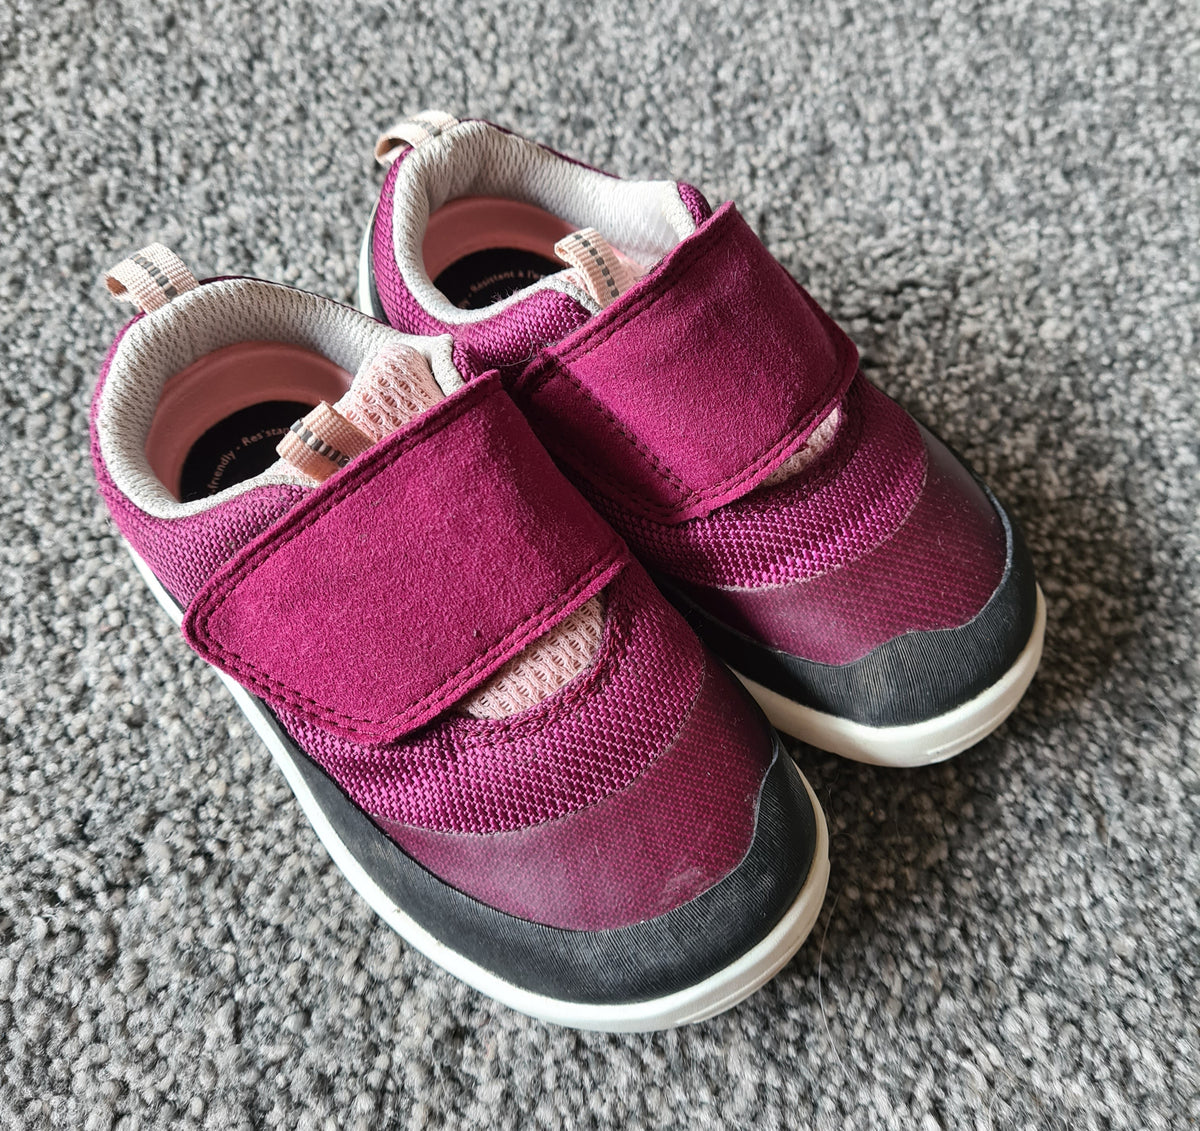 Clarks Trainers, Girls Infant Size 5 G